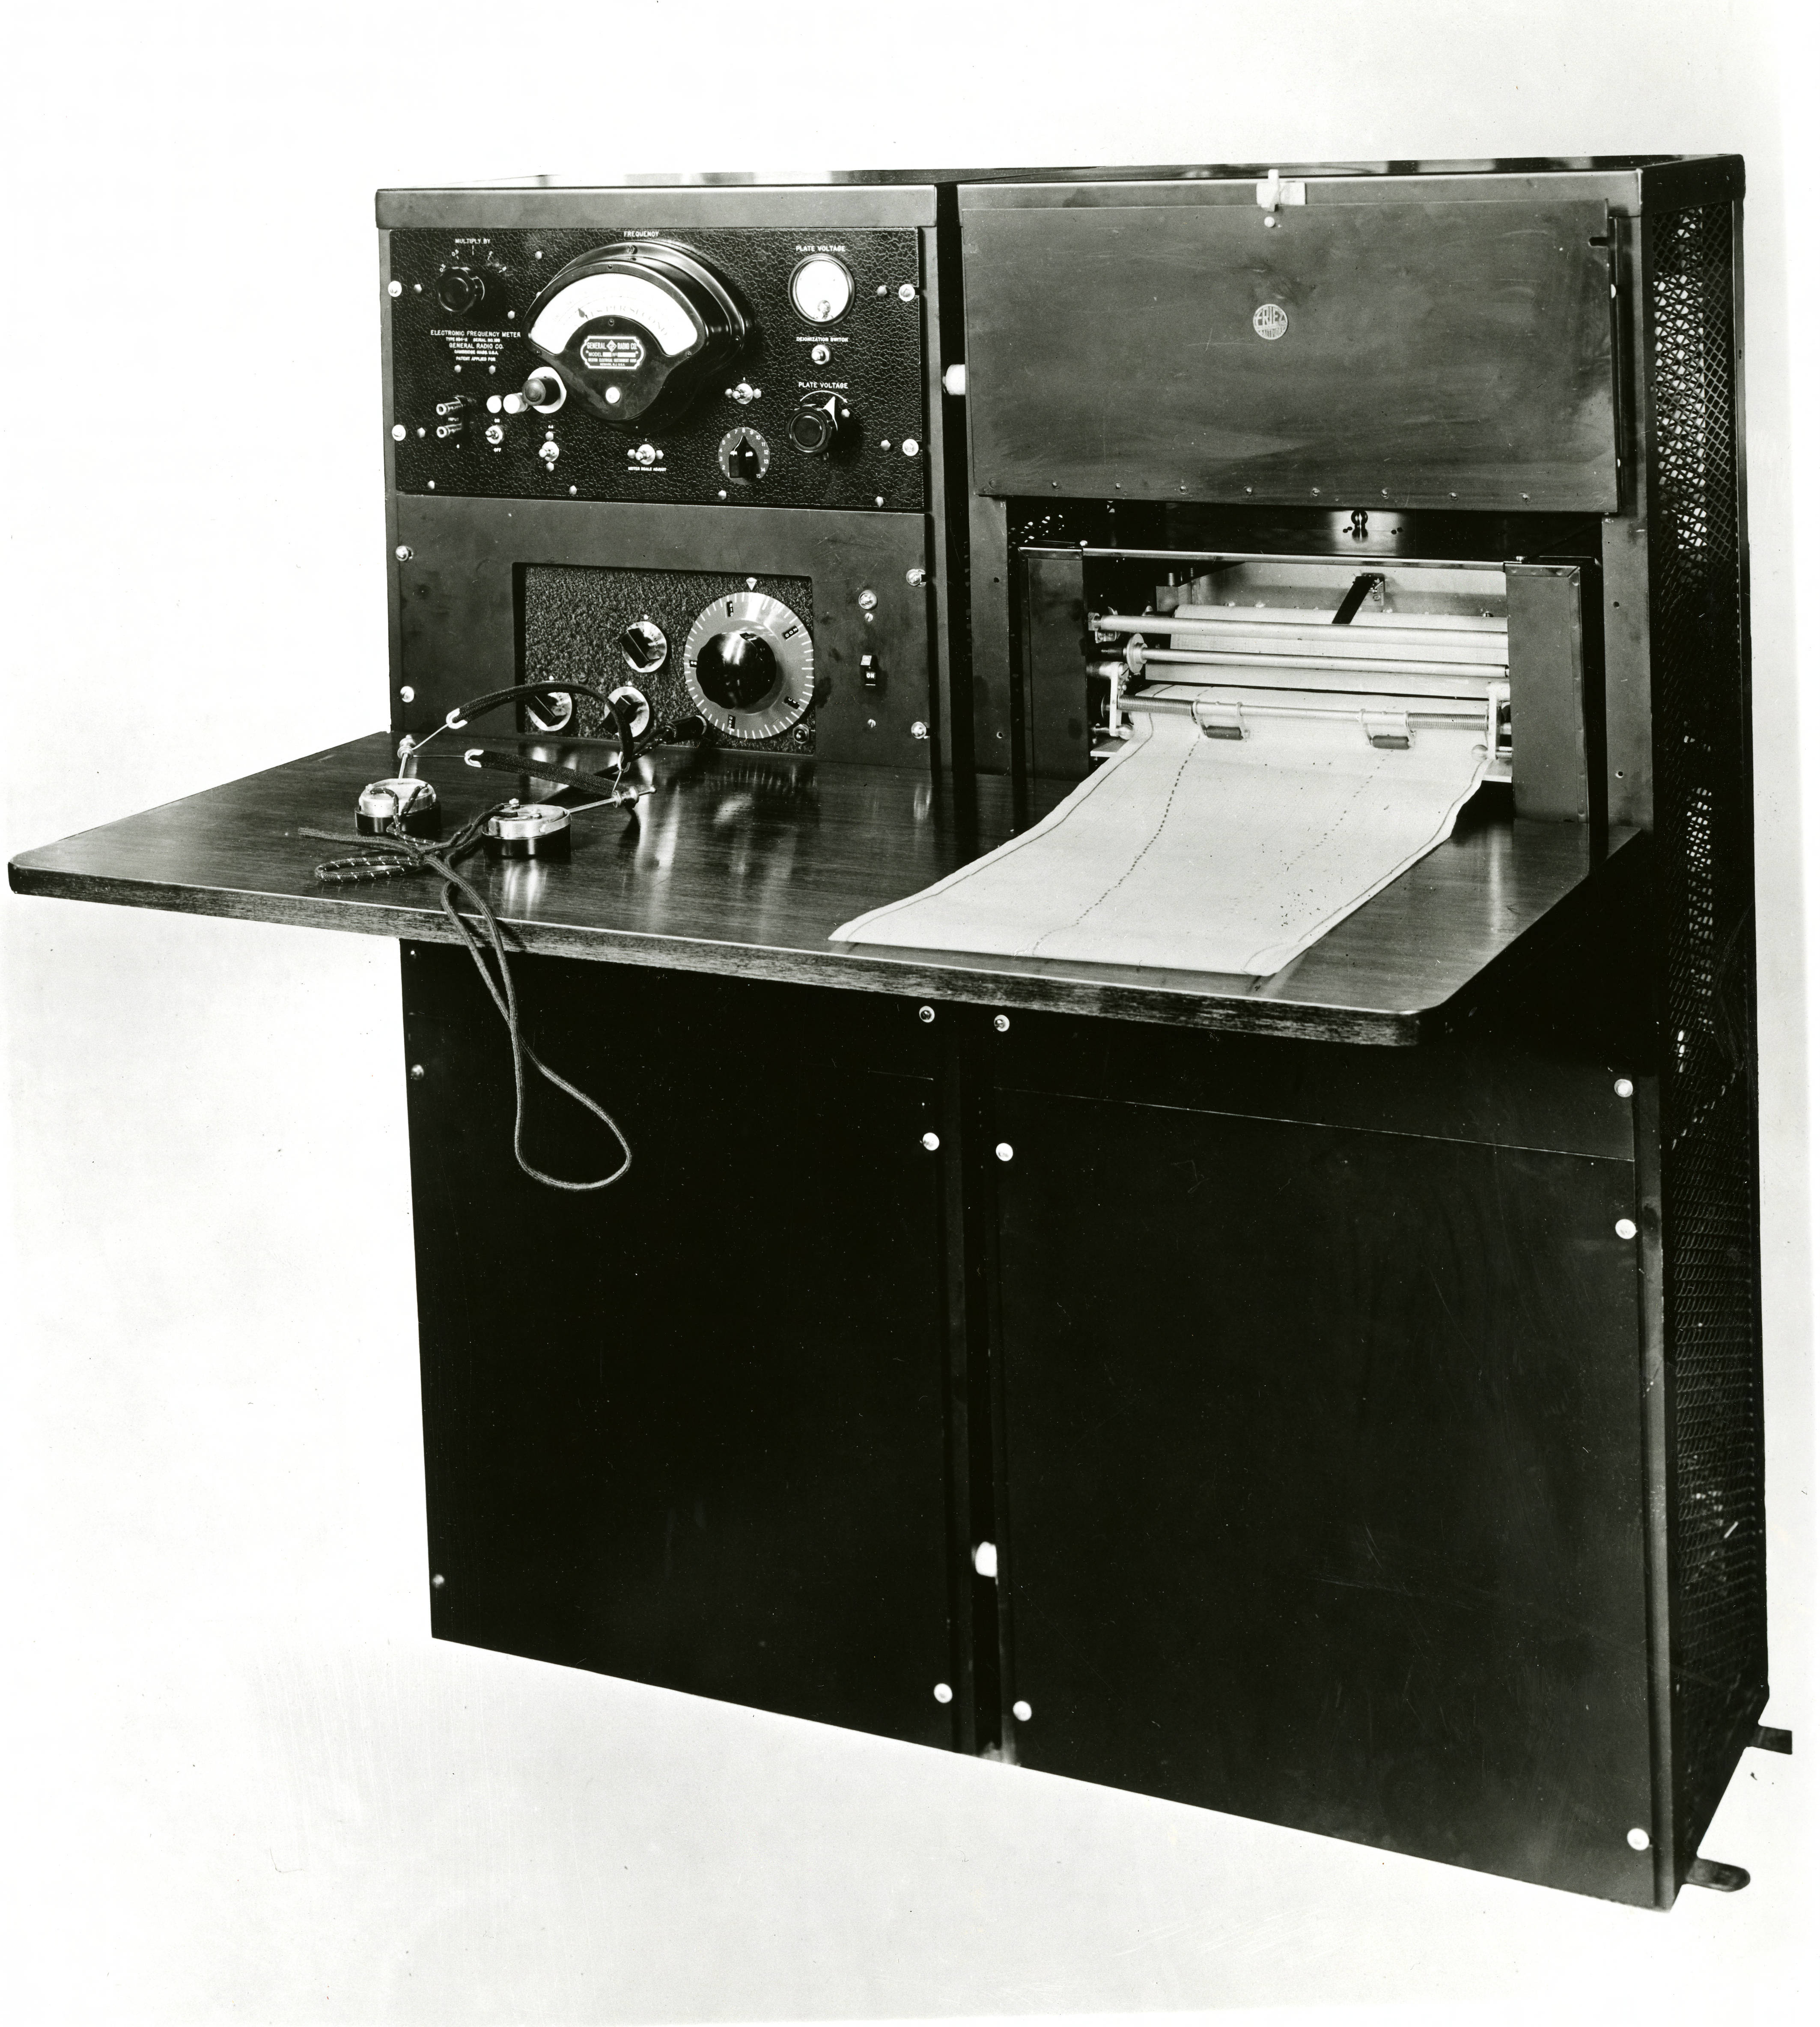 Photograph of a ground station for receiving and recording radiosonde data,1939.